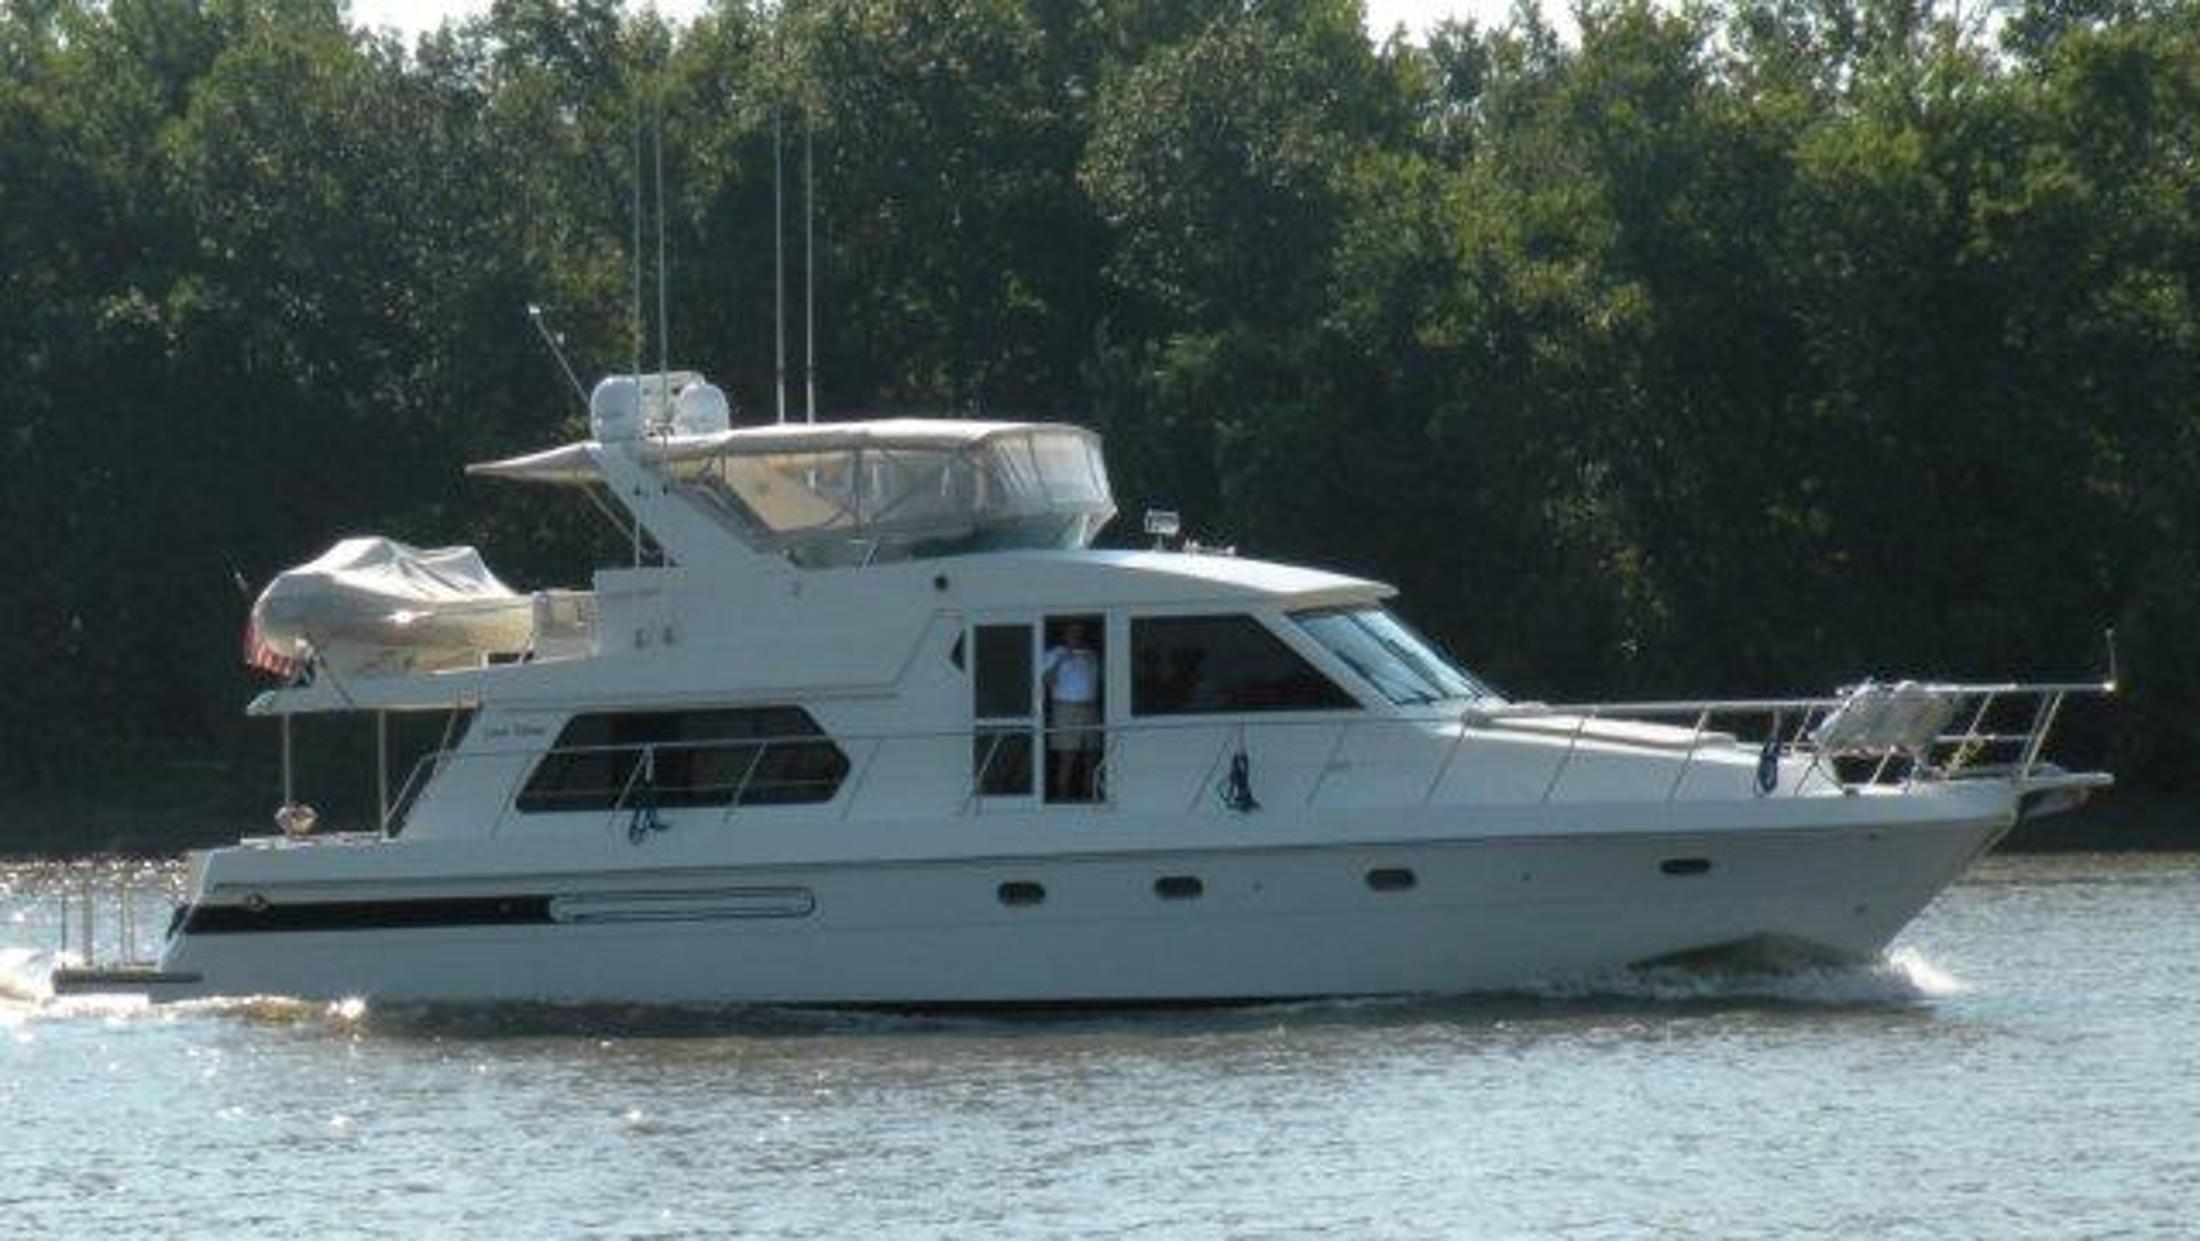 Grand Harbour 57' Pilothouse Motor Yacht, Grand Harbour 57, Pickwick Lake, TN